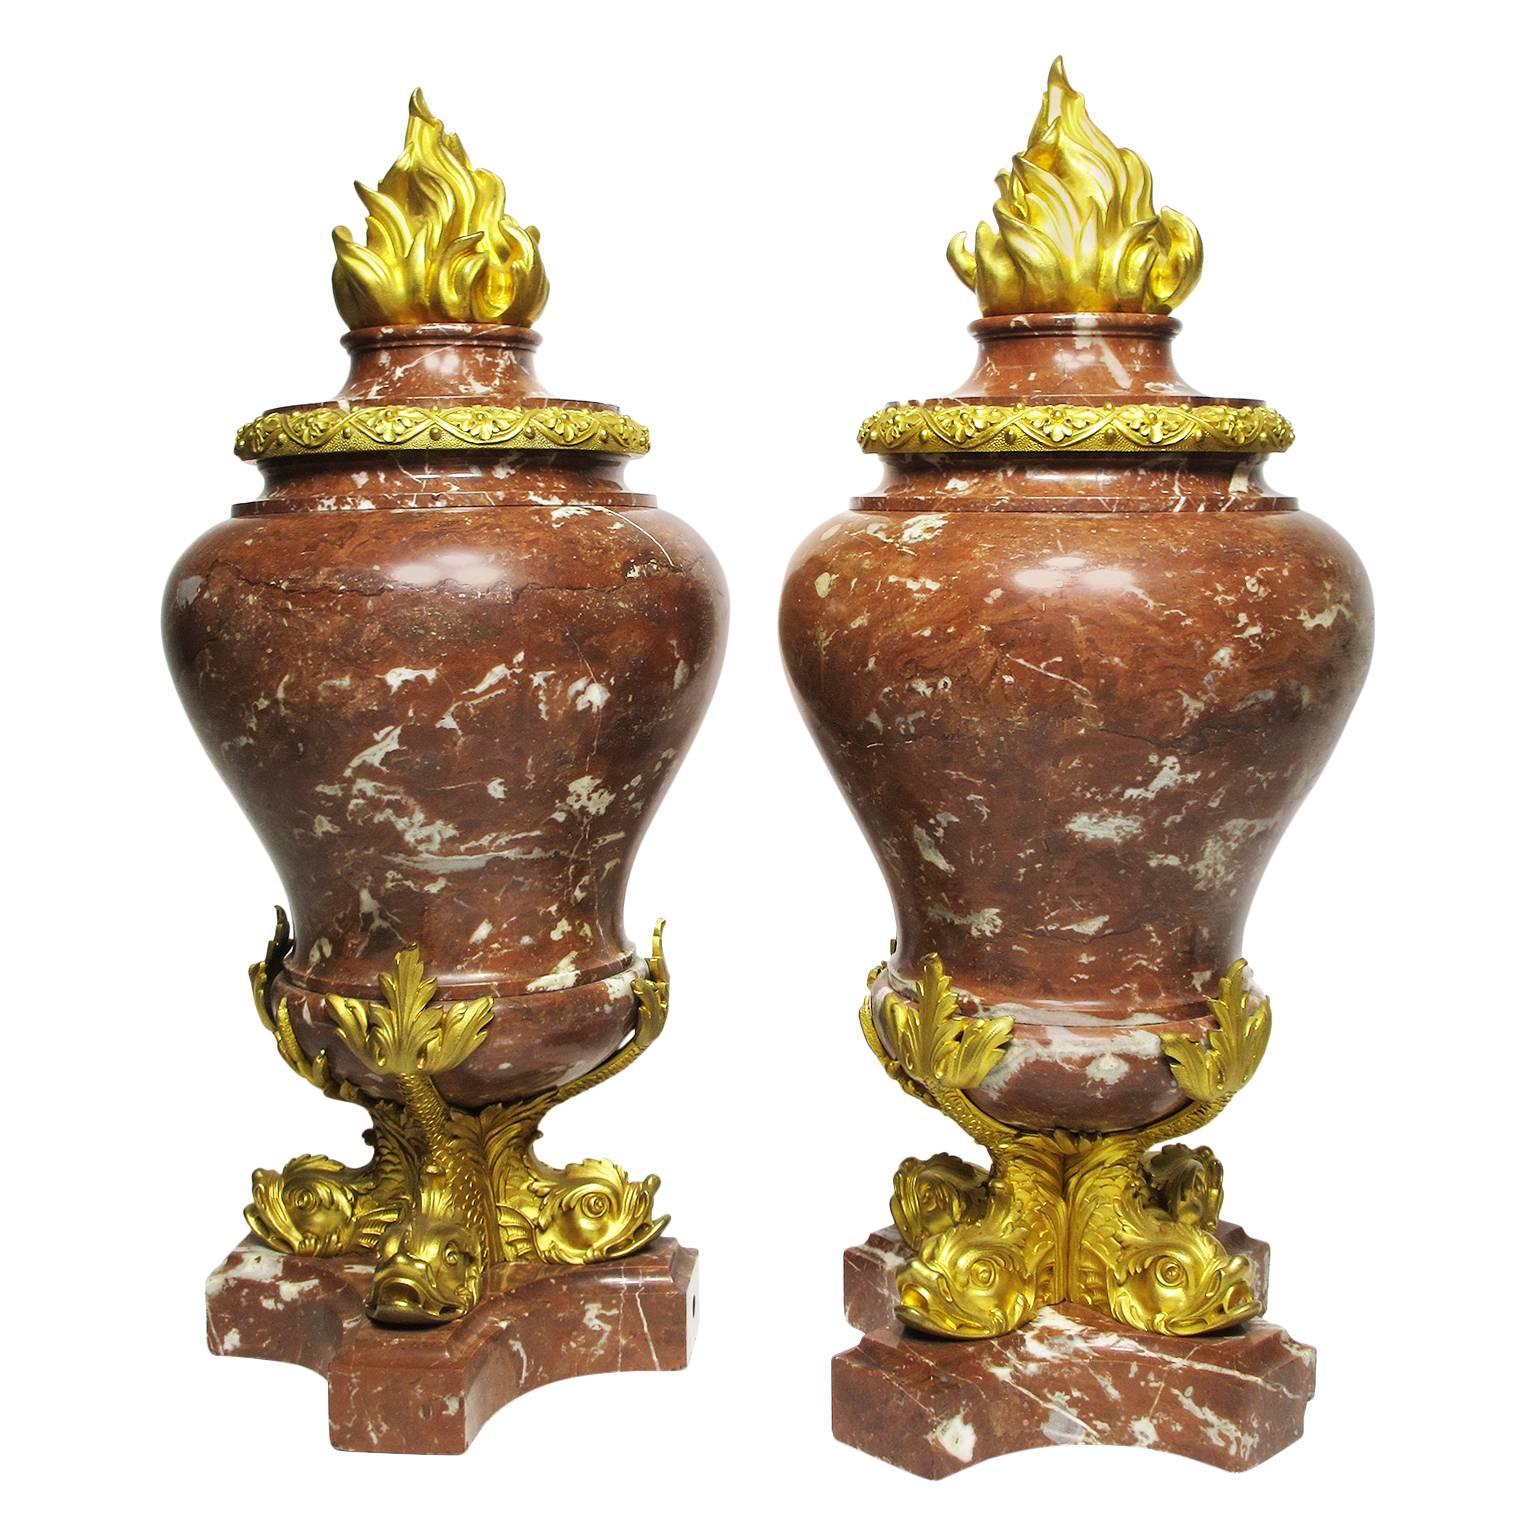 Fine Pair of French 19th Century Marble and Gilt Bronze-Mounted Flambeaux Urns For Sale